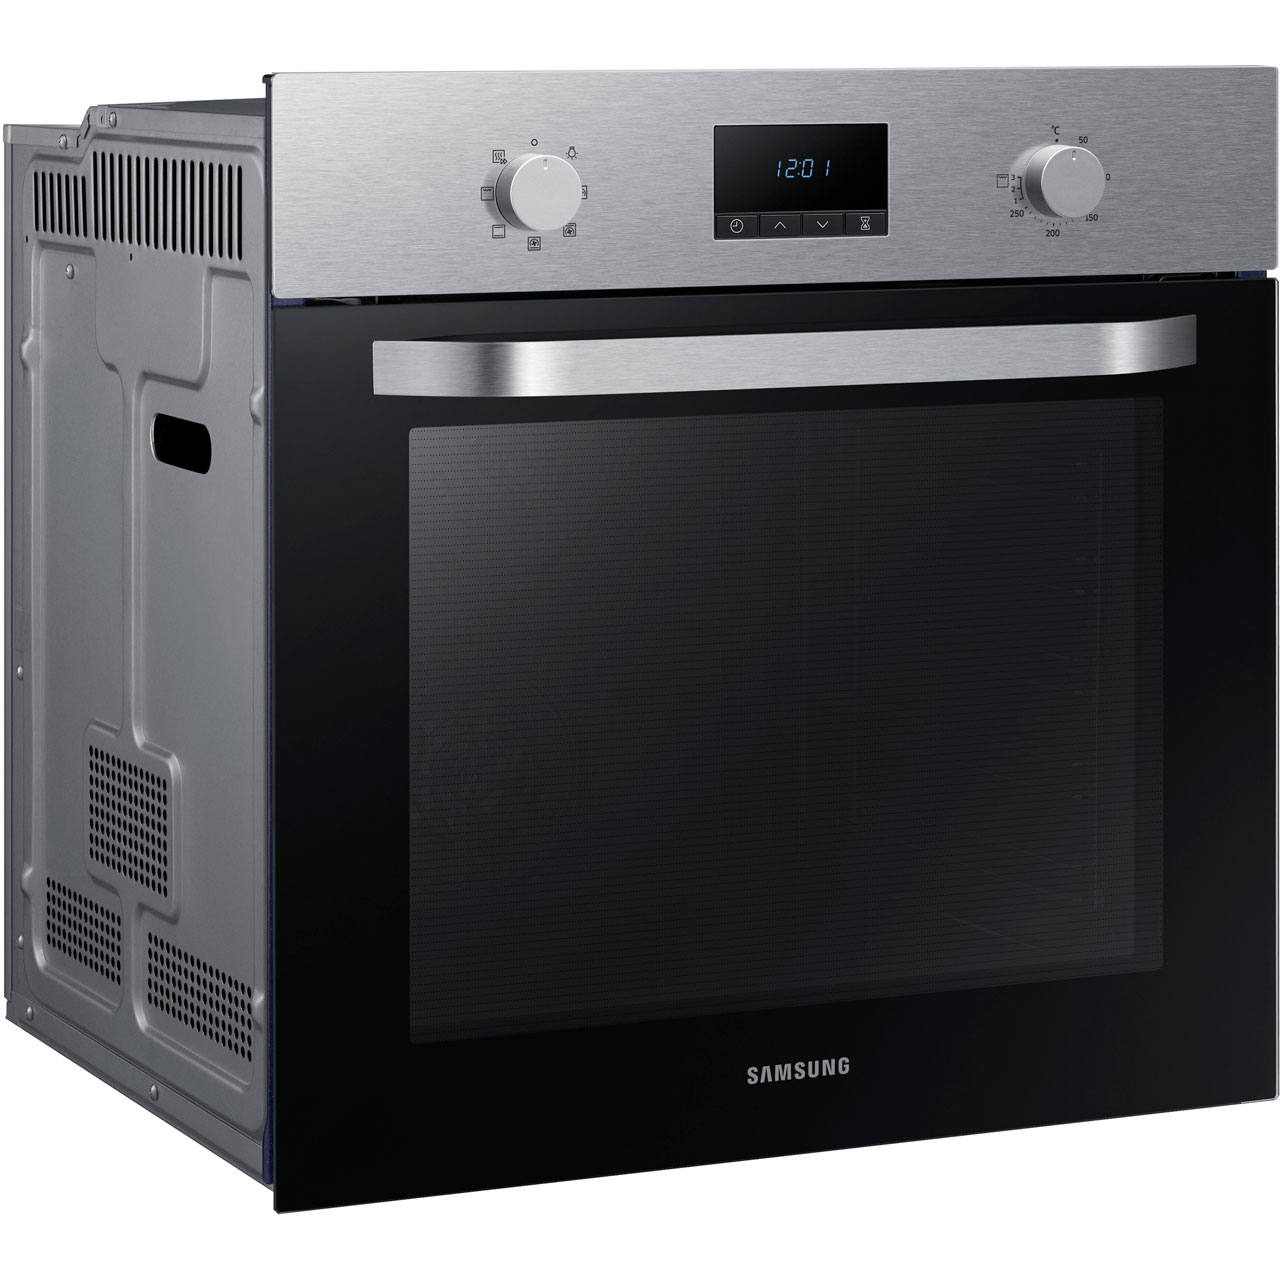 Samsung NV70K1310BS Dual Fan Built In 60cm A Electric Single Oven Stainless 8806088915623 eBay